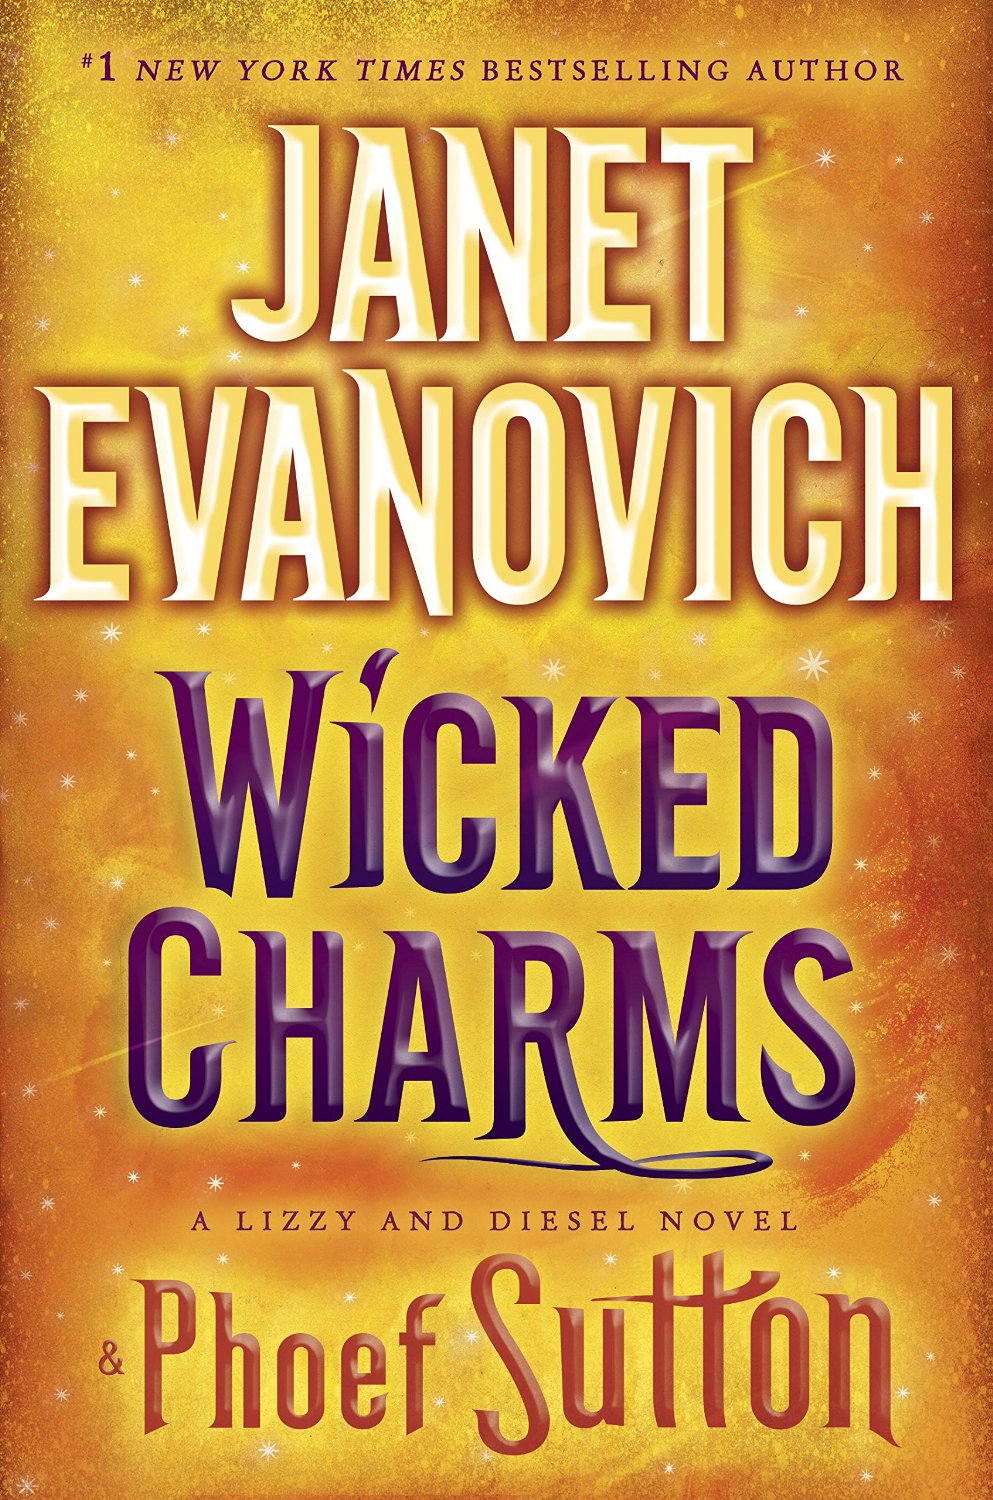 Evanovich Wicked Charms